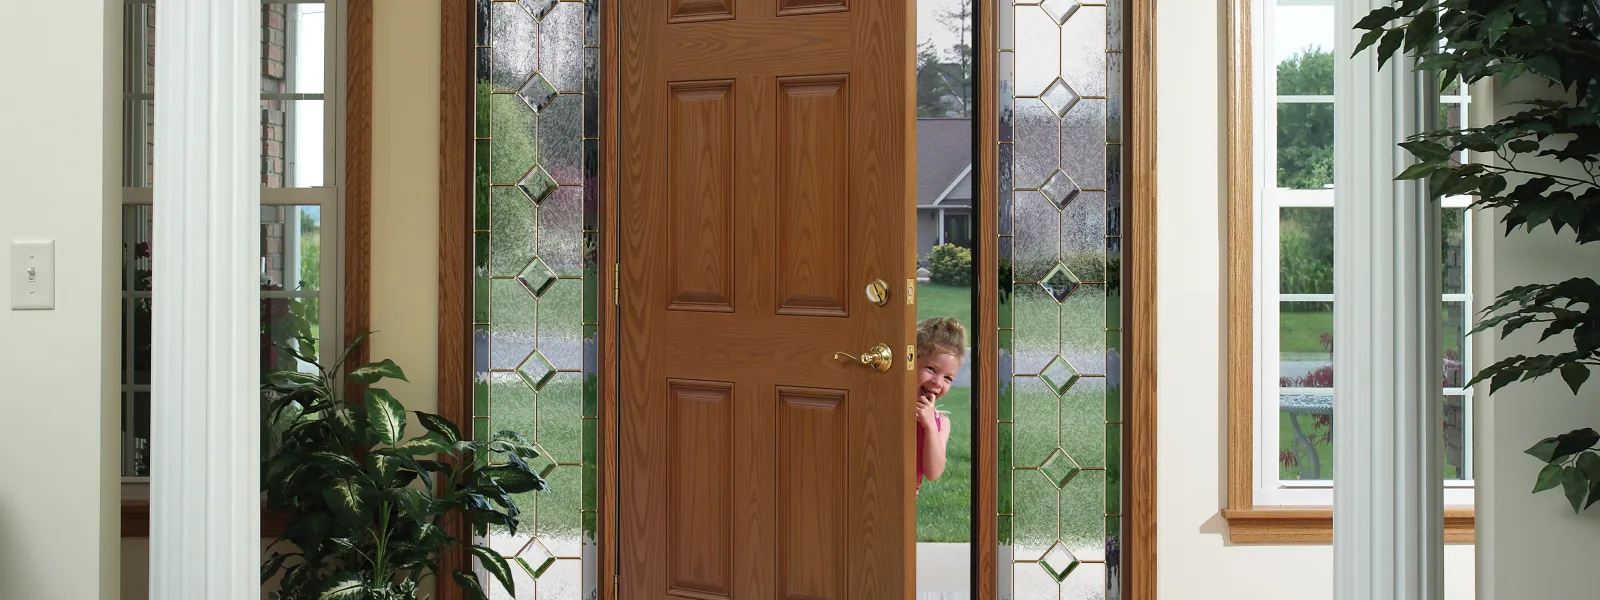 3 Tips When Shopping for a Door Replacement